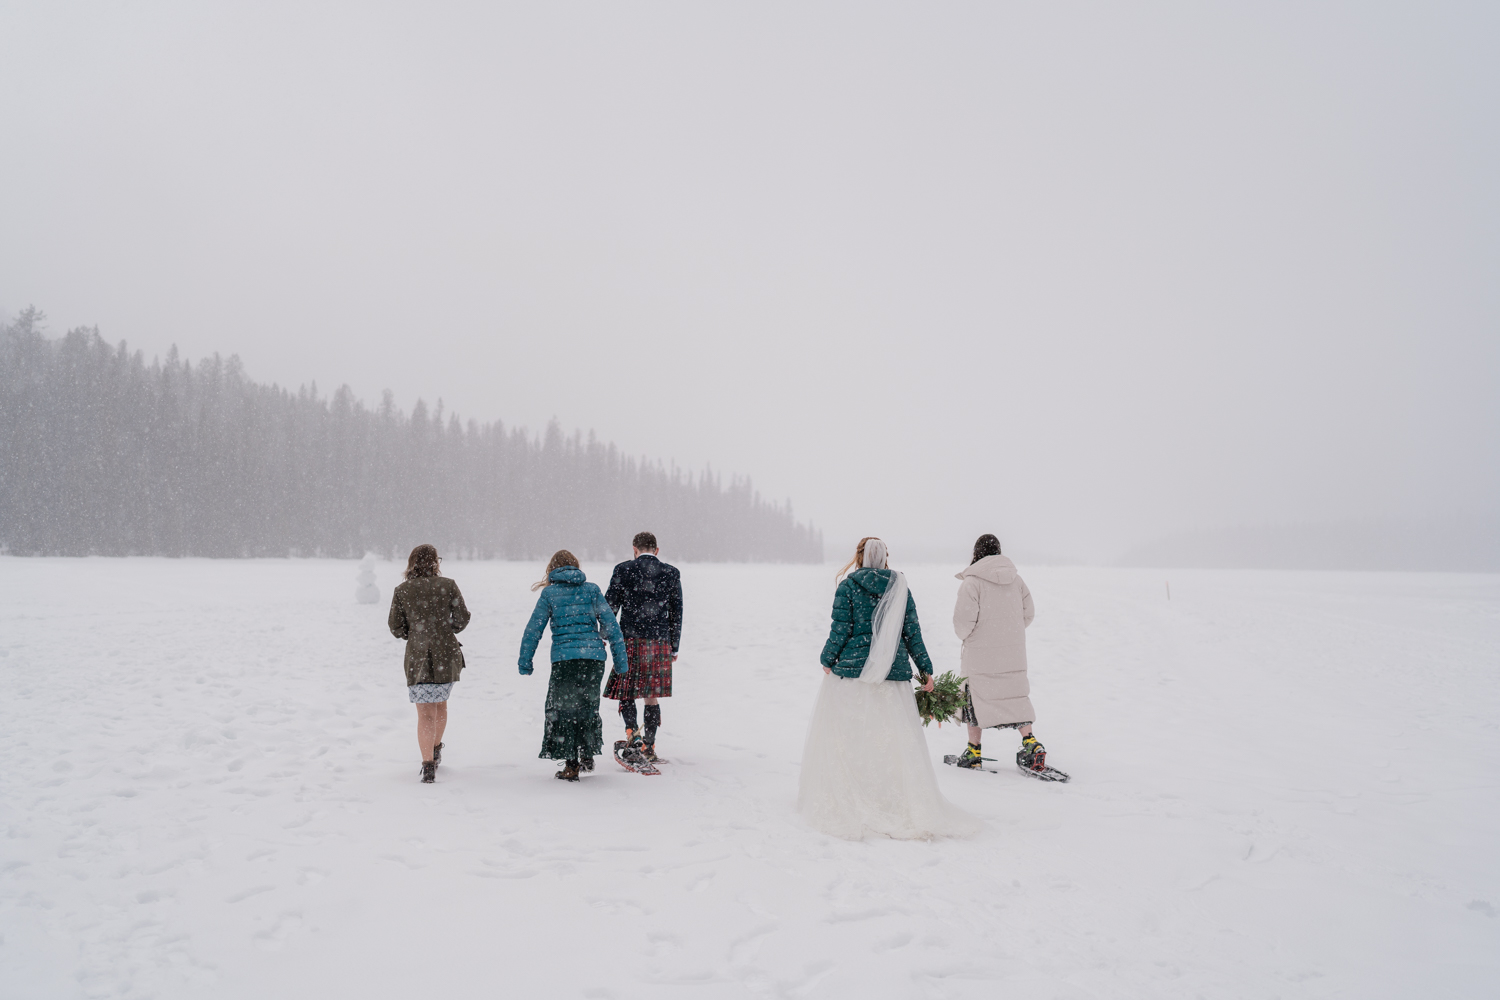 Bride and groom and 3 friends snowshoe off into the distance on a frozen Emerald Lake in a snowstorm